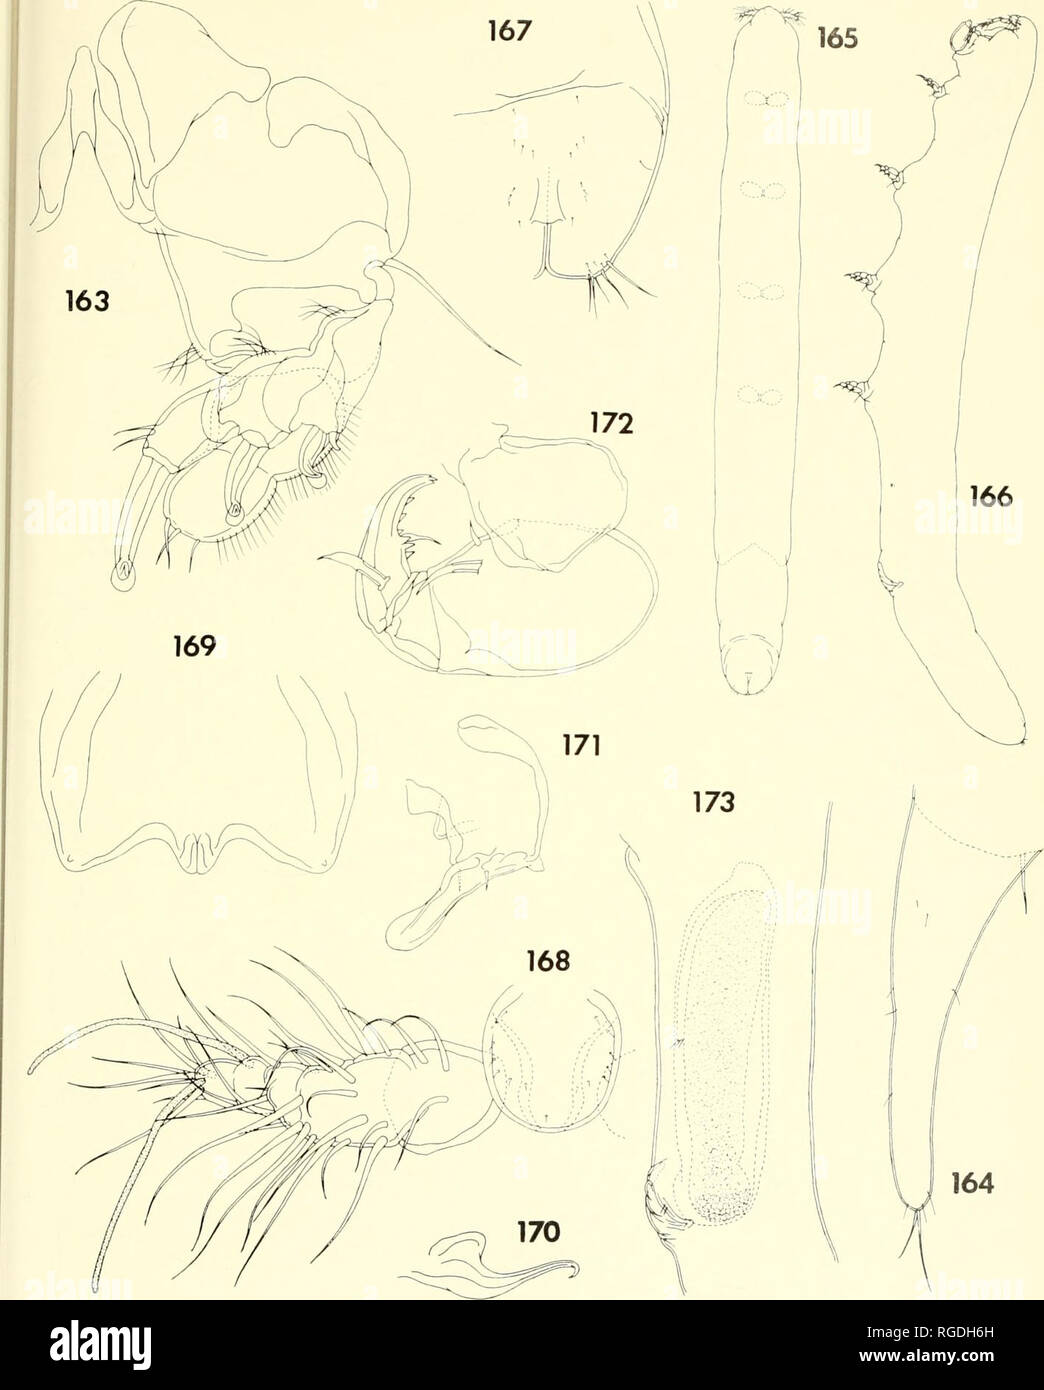 . Bulletin of the Museum of Comparative Zoology at Harvard College. Zoology. Parasitic Copepods from Corals in Madagascar • Humes and Ho 453. Figures 163-164. Xantia anomala n. sp., female (continued). 163, leg 2 and intercoxal plate, posterior (E); 164, leg 5, lateral (C). Figures 165-173. Xarifia anomala n. sp., male. 165, body, dorsal (I); 166, body, lateral (I); 167, caudal ramus, dorsal (C); 168, rostrum and first antenna, ventral (E); 169, labrum, ventral (E); 170, mandible, ventral (E); 171, second max- illa, anteroexternal (E); 172, maxilliped, medial (D); 173, port'on of urosome showi Stock Photo